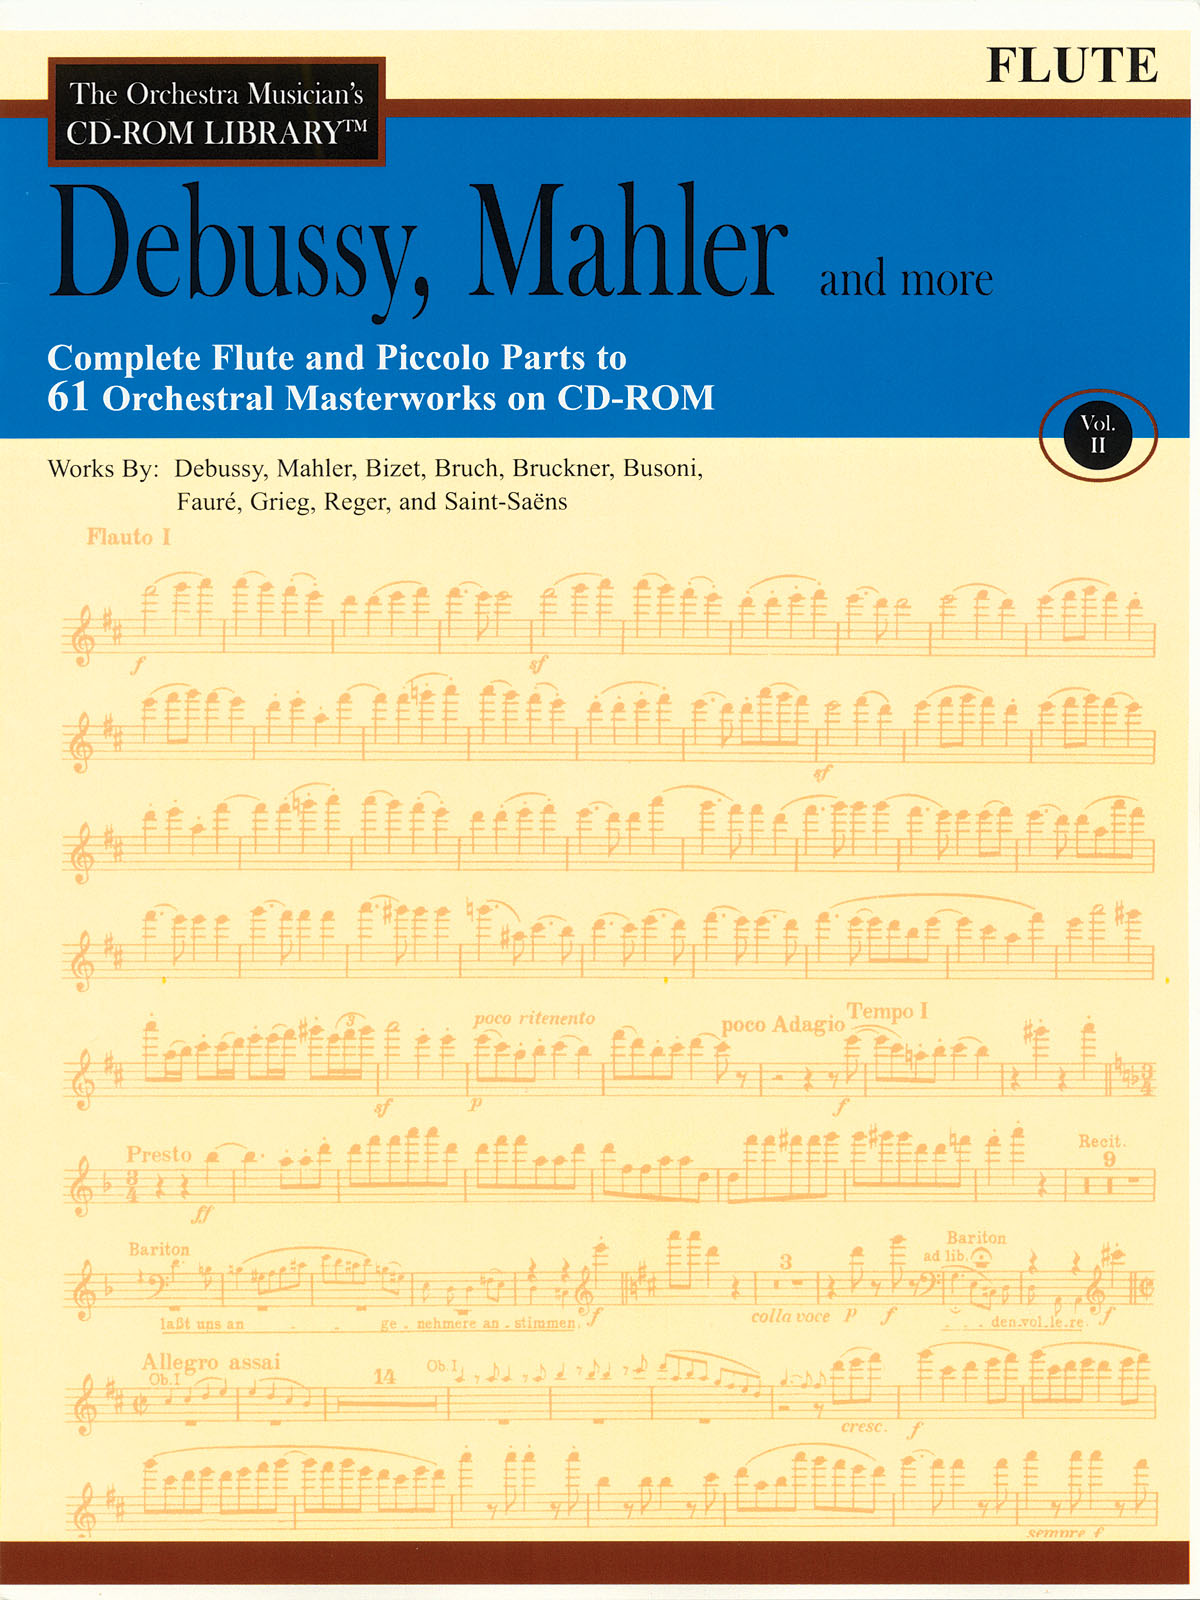 Debussy, Mahler and More - Volume 2(The Orchestra Musician's CD-ROM Library - Flute)